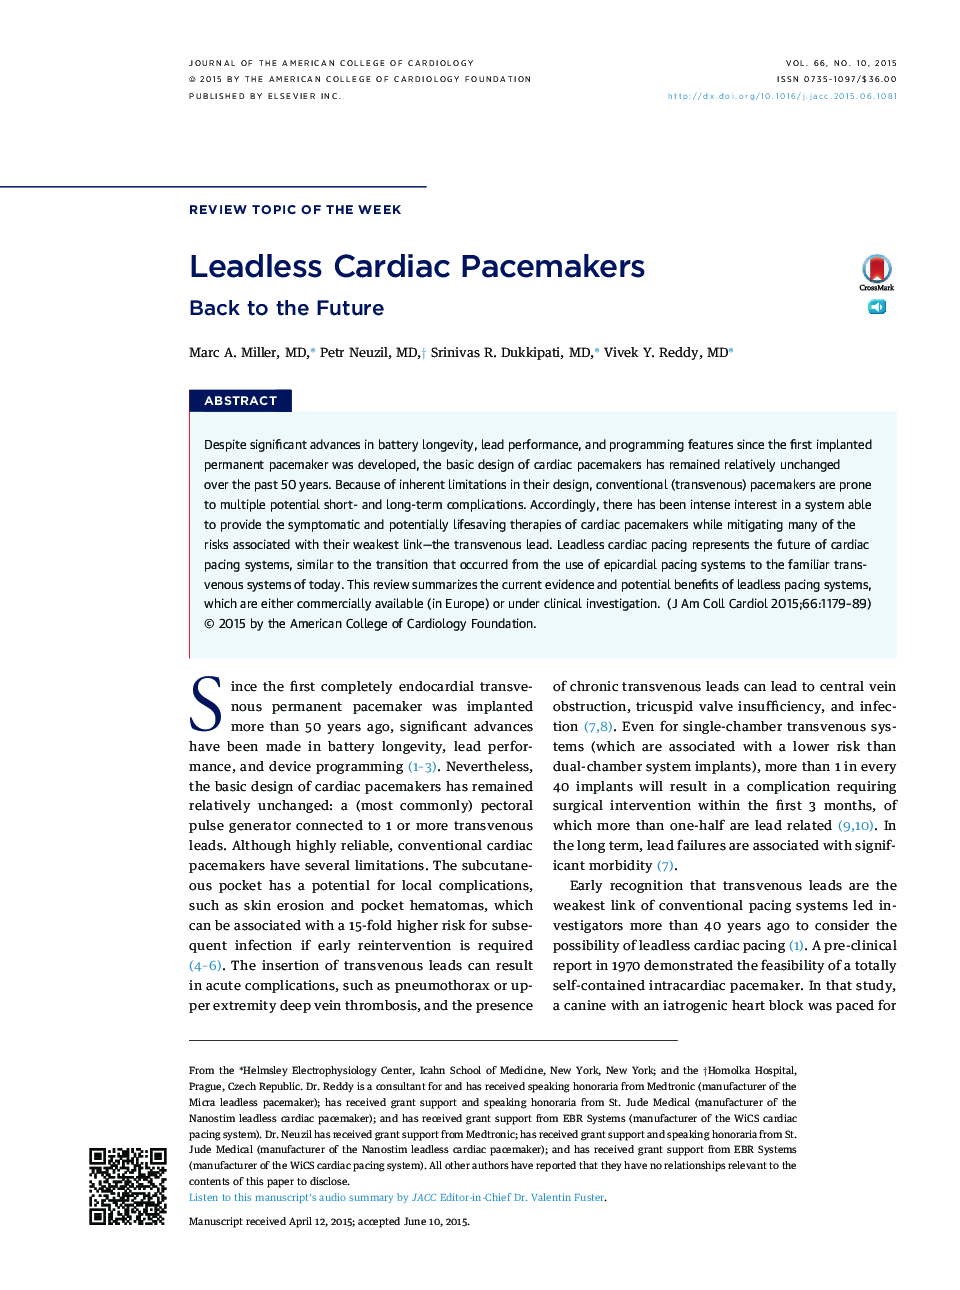 Leadless Cardiac Pacemakers : Back to the Future